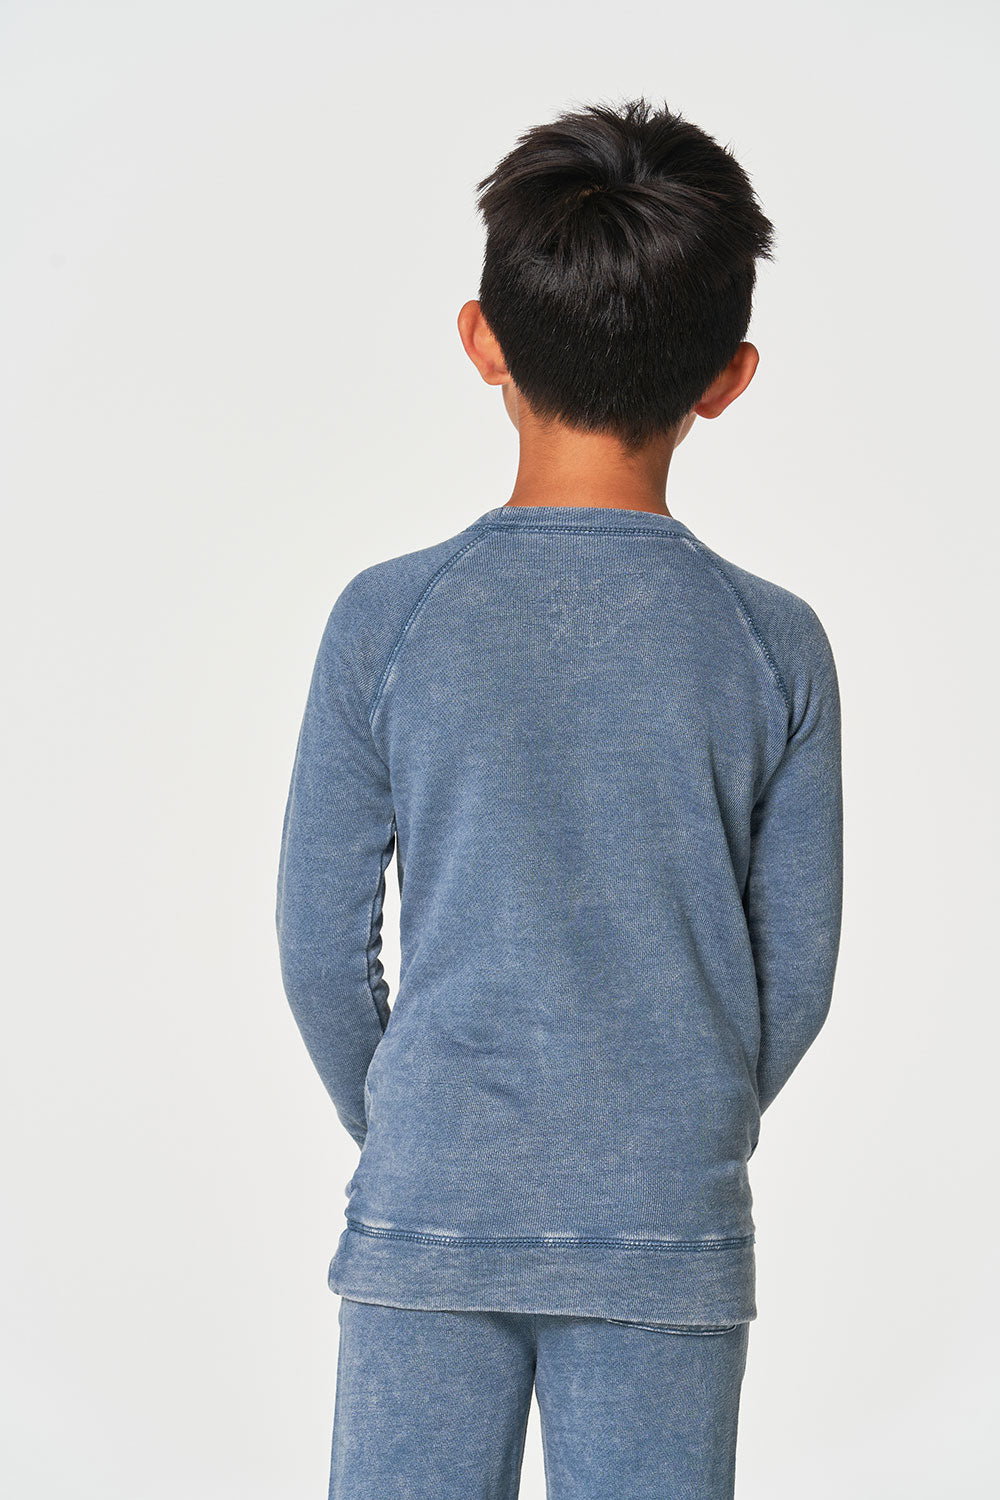 Boys Linen French Terry Long Sleeve Kanga Pocket Pullover BOYS chaserbrand